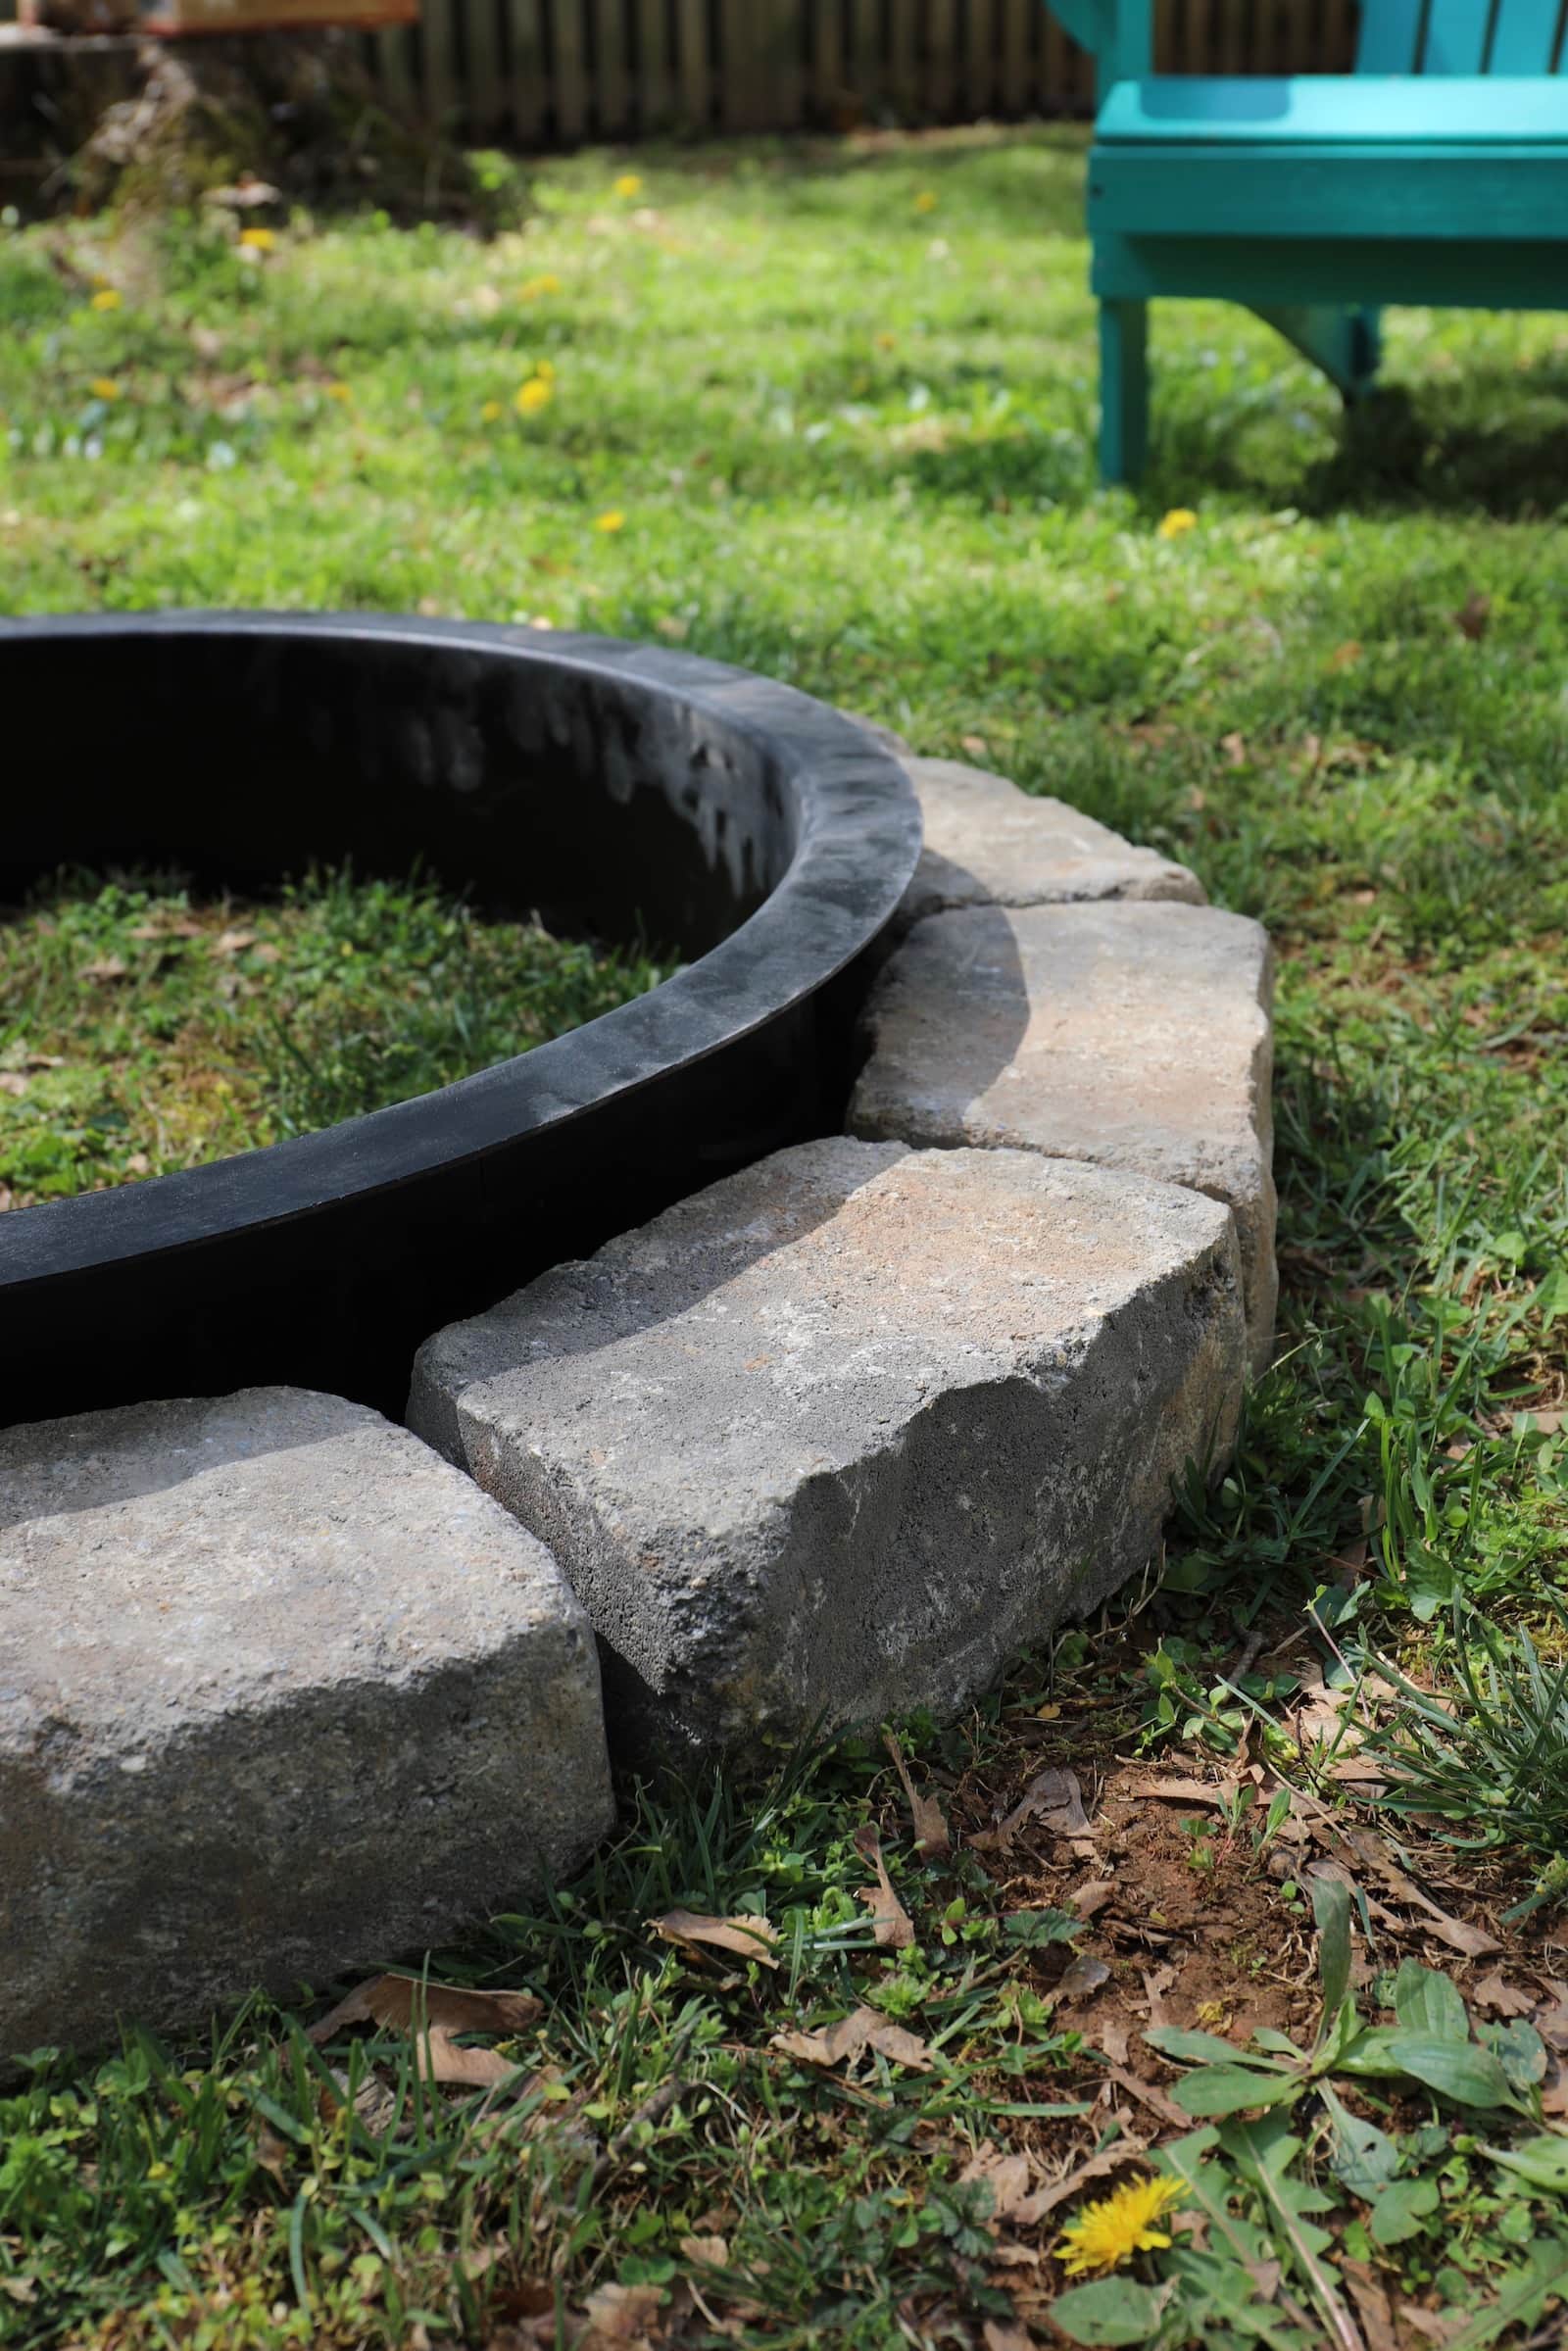 How to Build a Fire Pit in Your Backyard: I Used a Fire ...